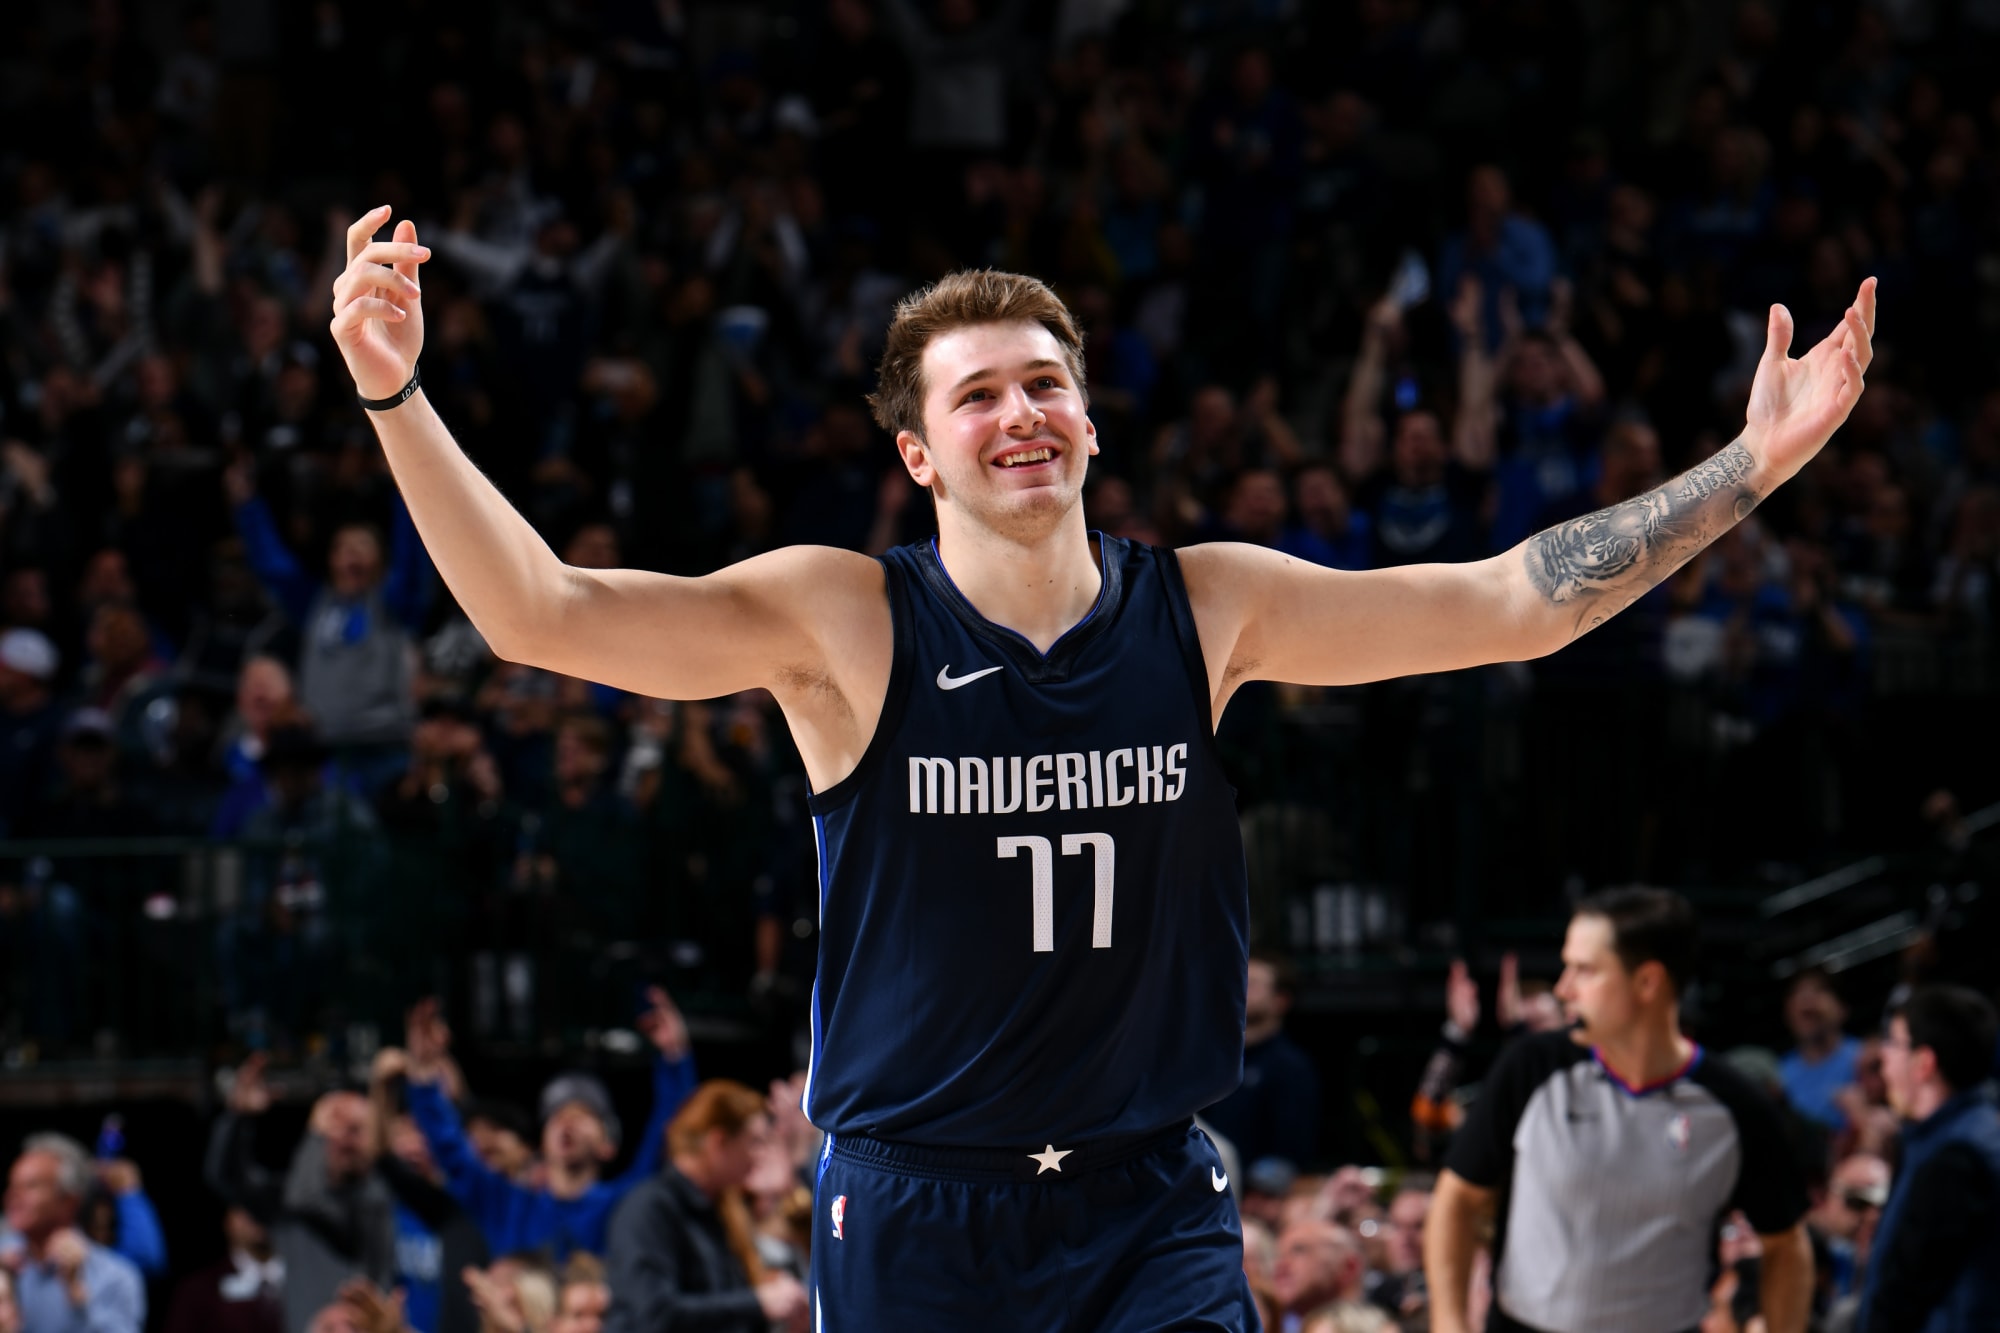 Dallas Mavericks: Vote for Luka Doncic to pass LeBron in All